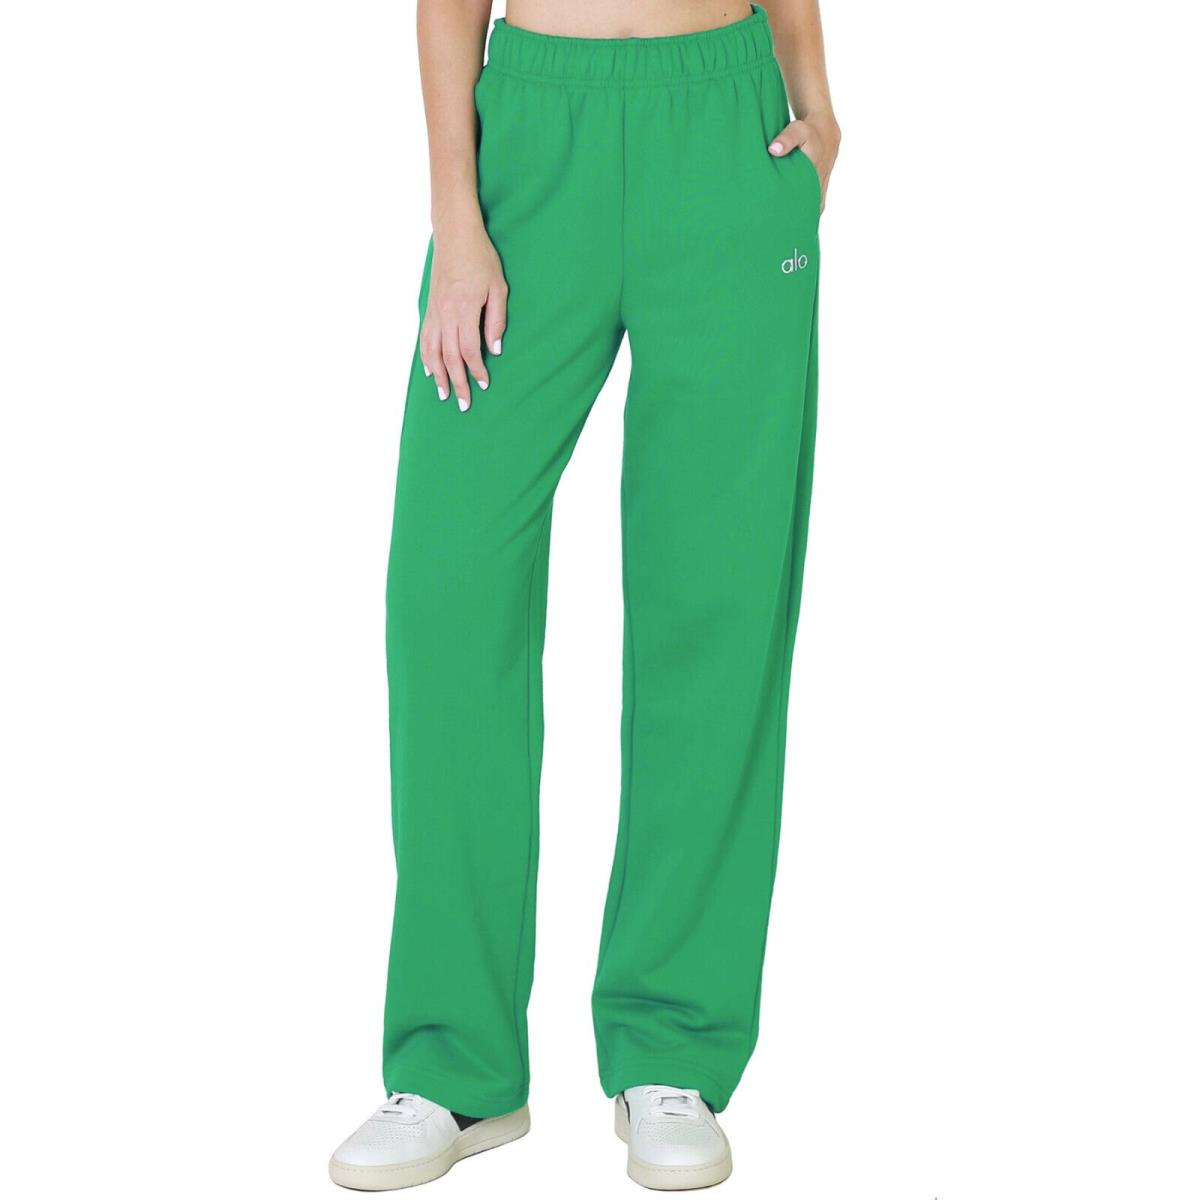 Alo Accolade Sweatpants High Waist Straight Leg French Terry Joggers Green